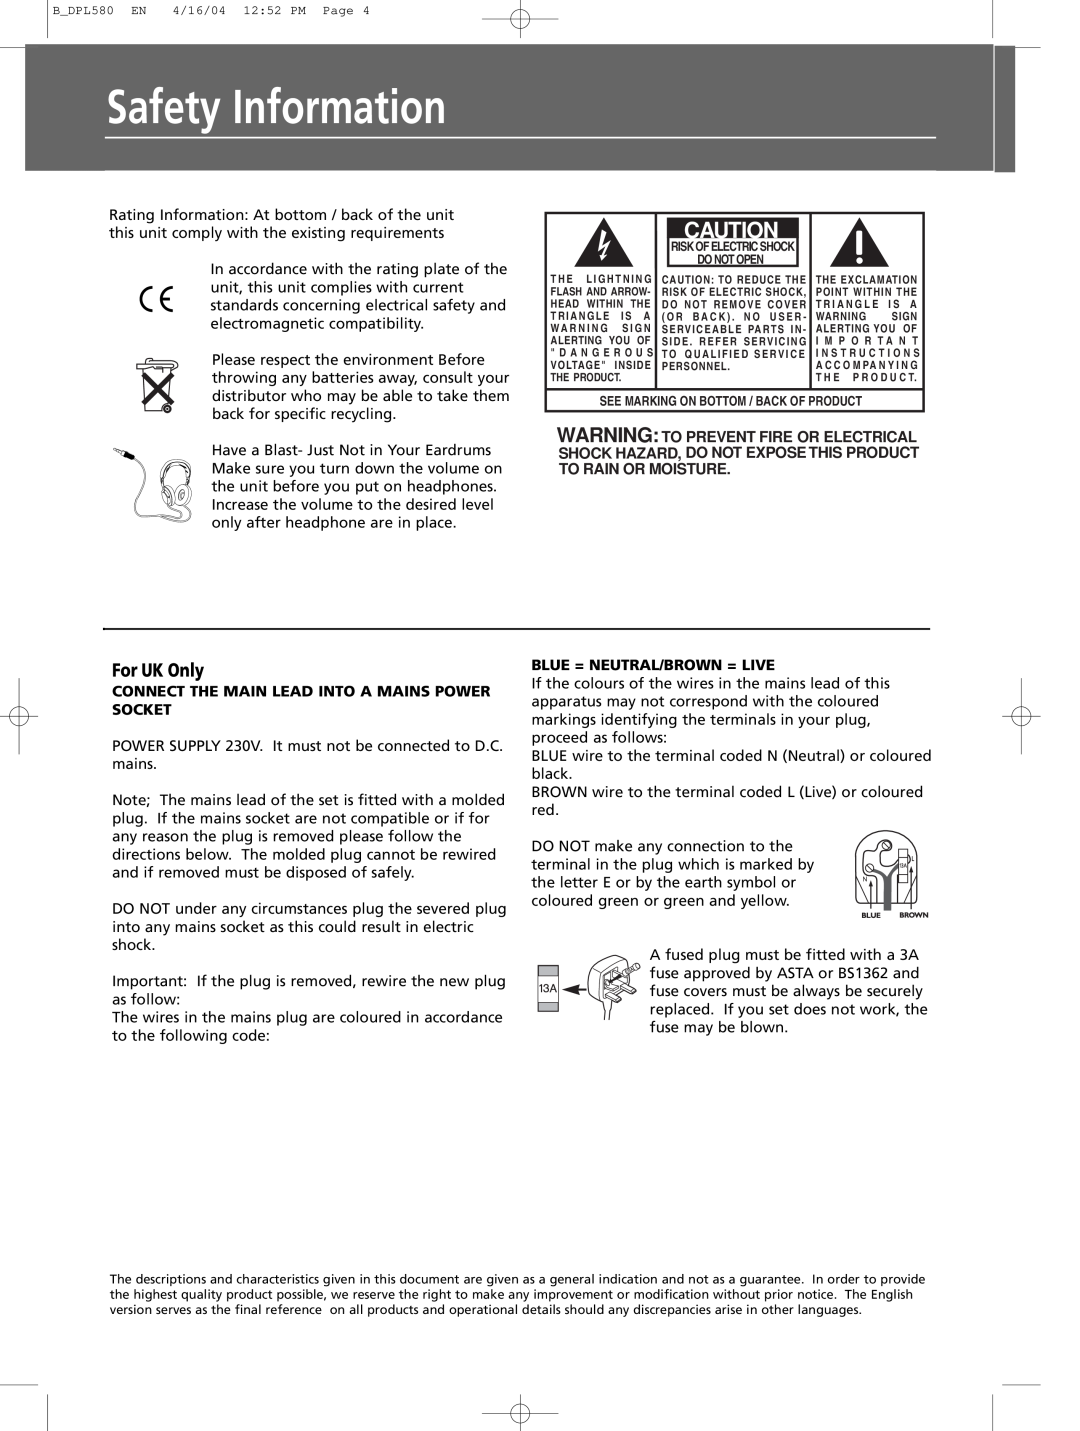 Technicolor - Thomson DPL580HT manual Safety Information, For UK Only, Connect The Main Lead Into A Mains Power Socket 